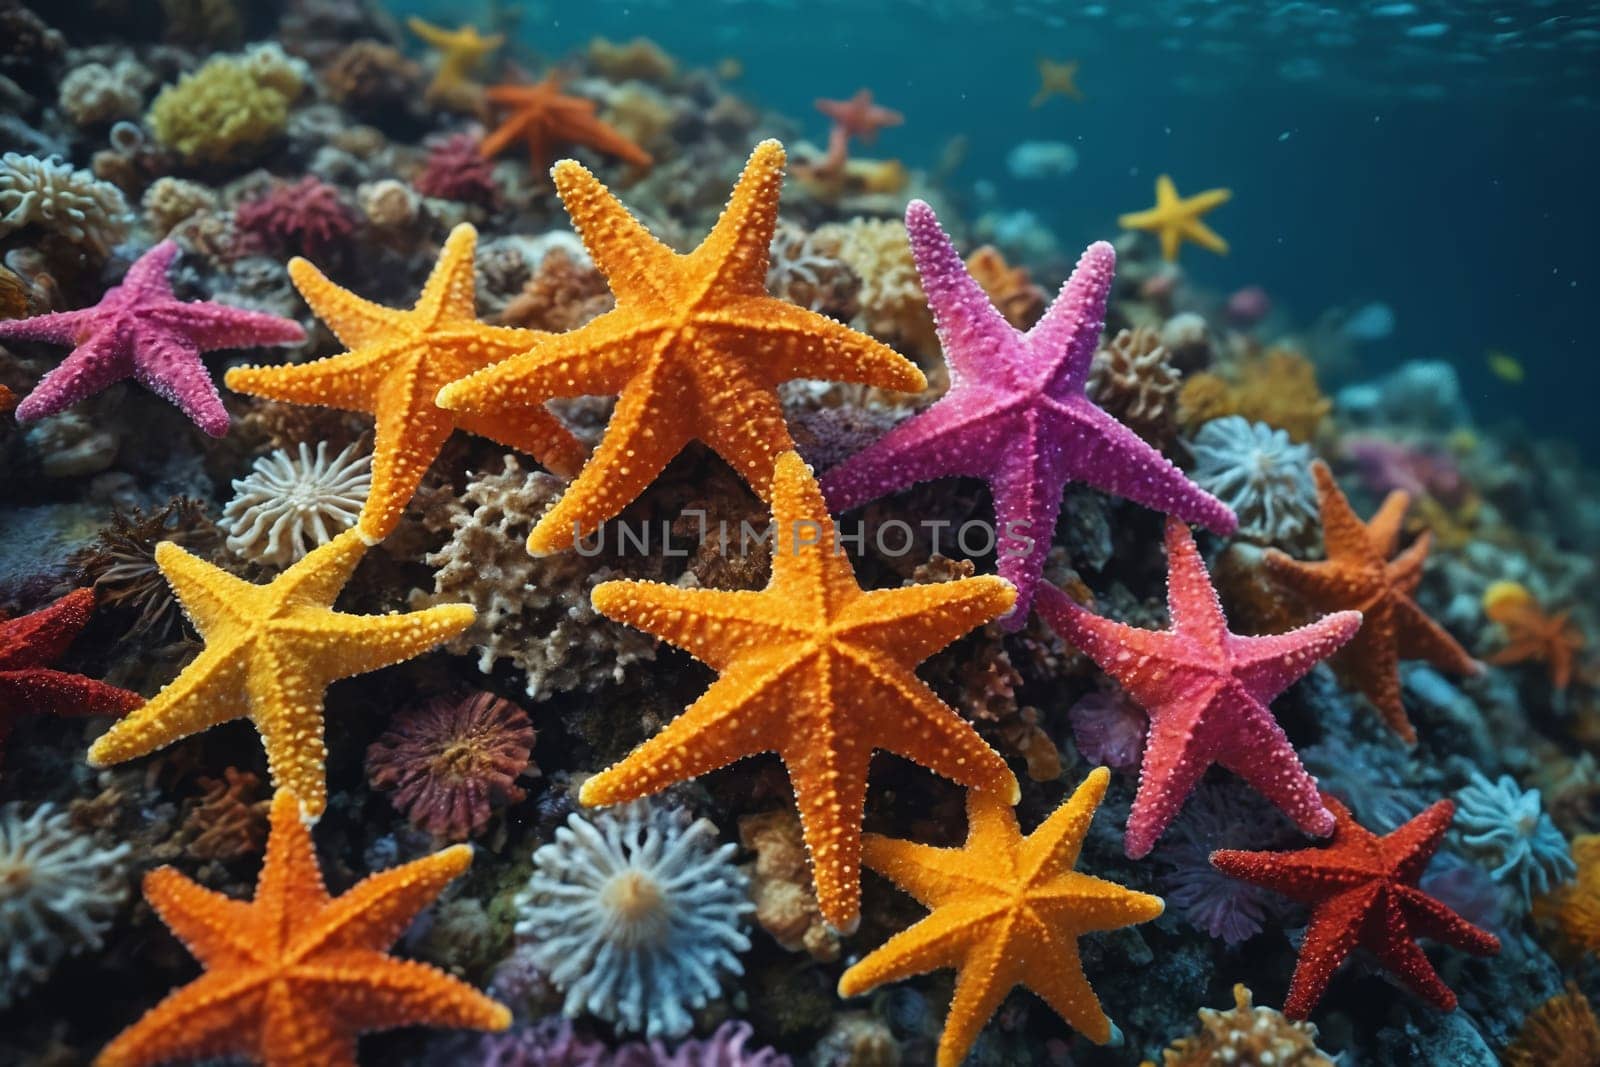 Echinoderms of the Sea: A Starfish's Journey Underwater by Andre1ns